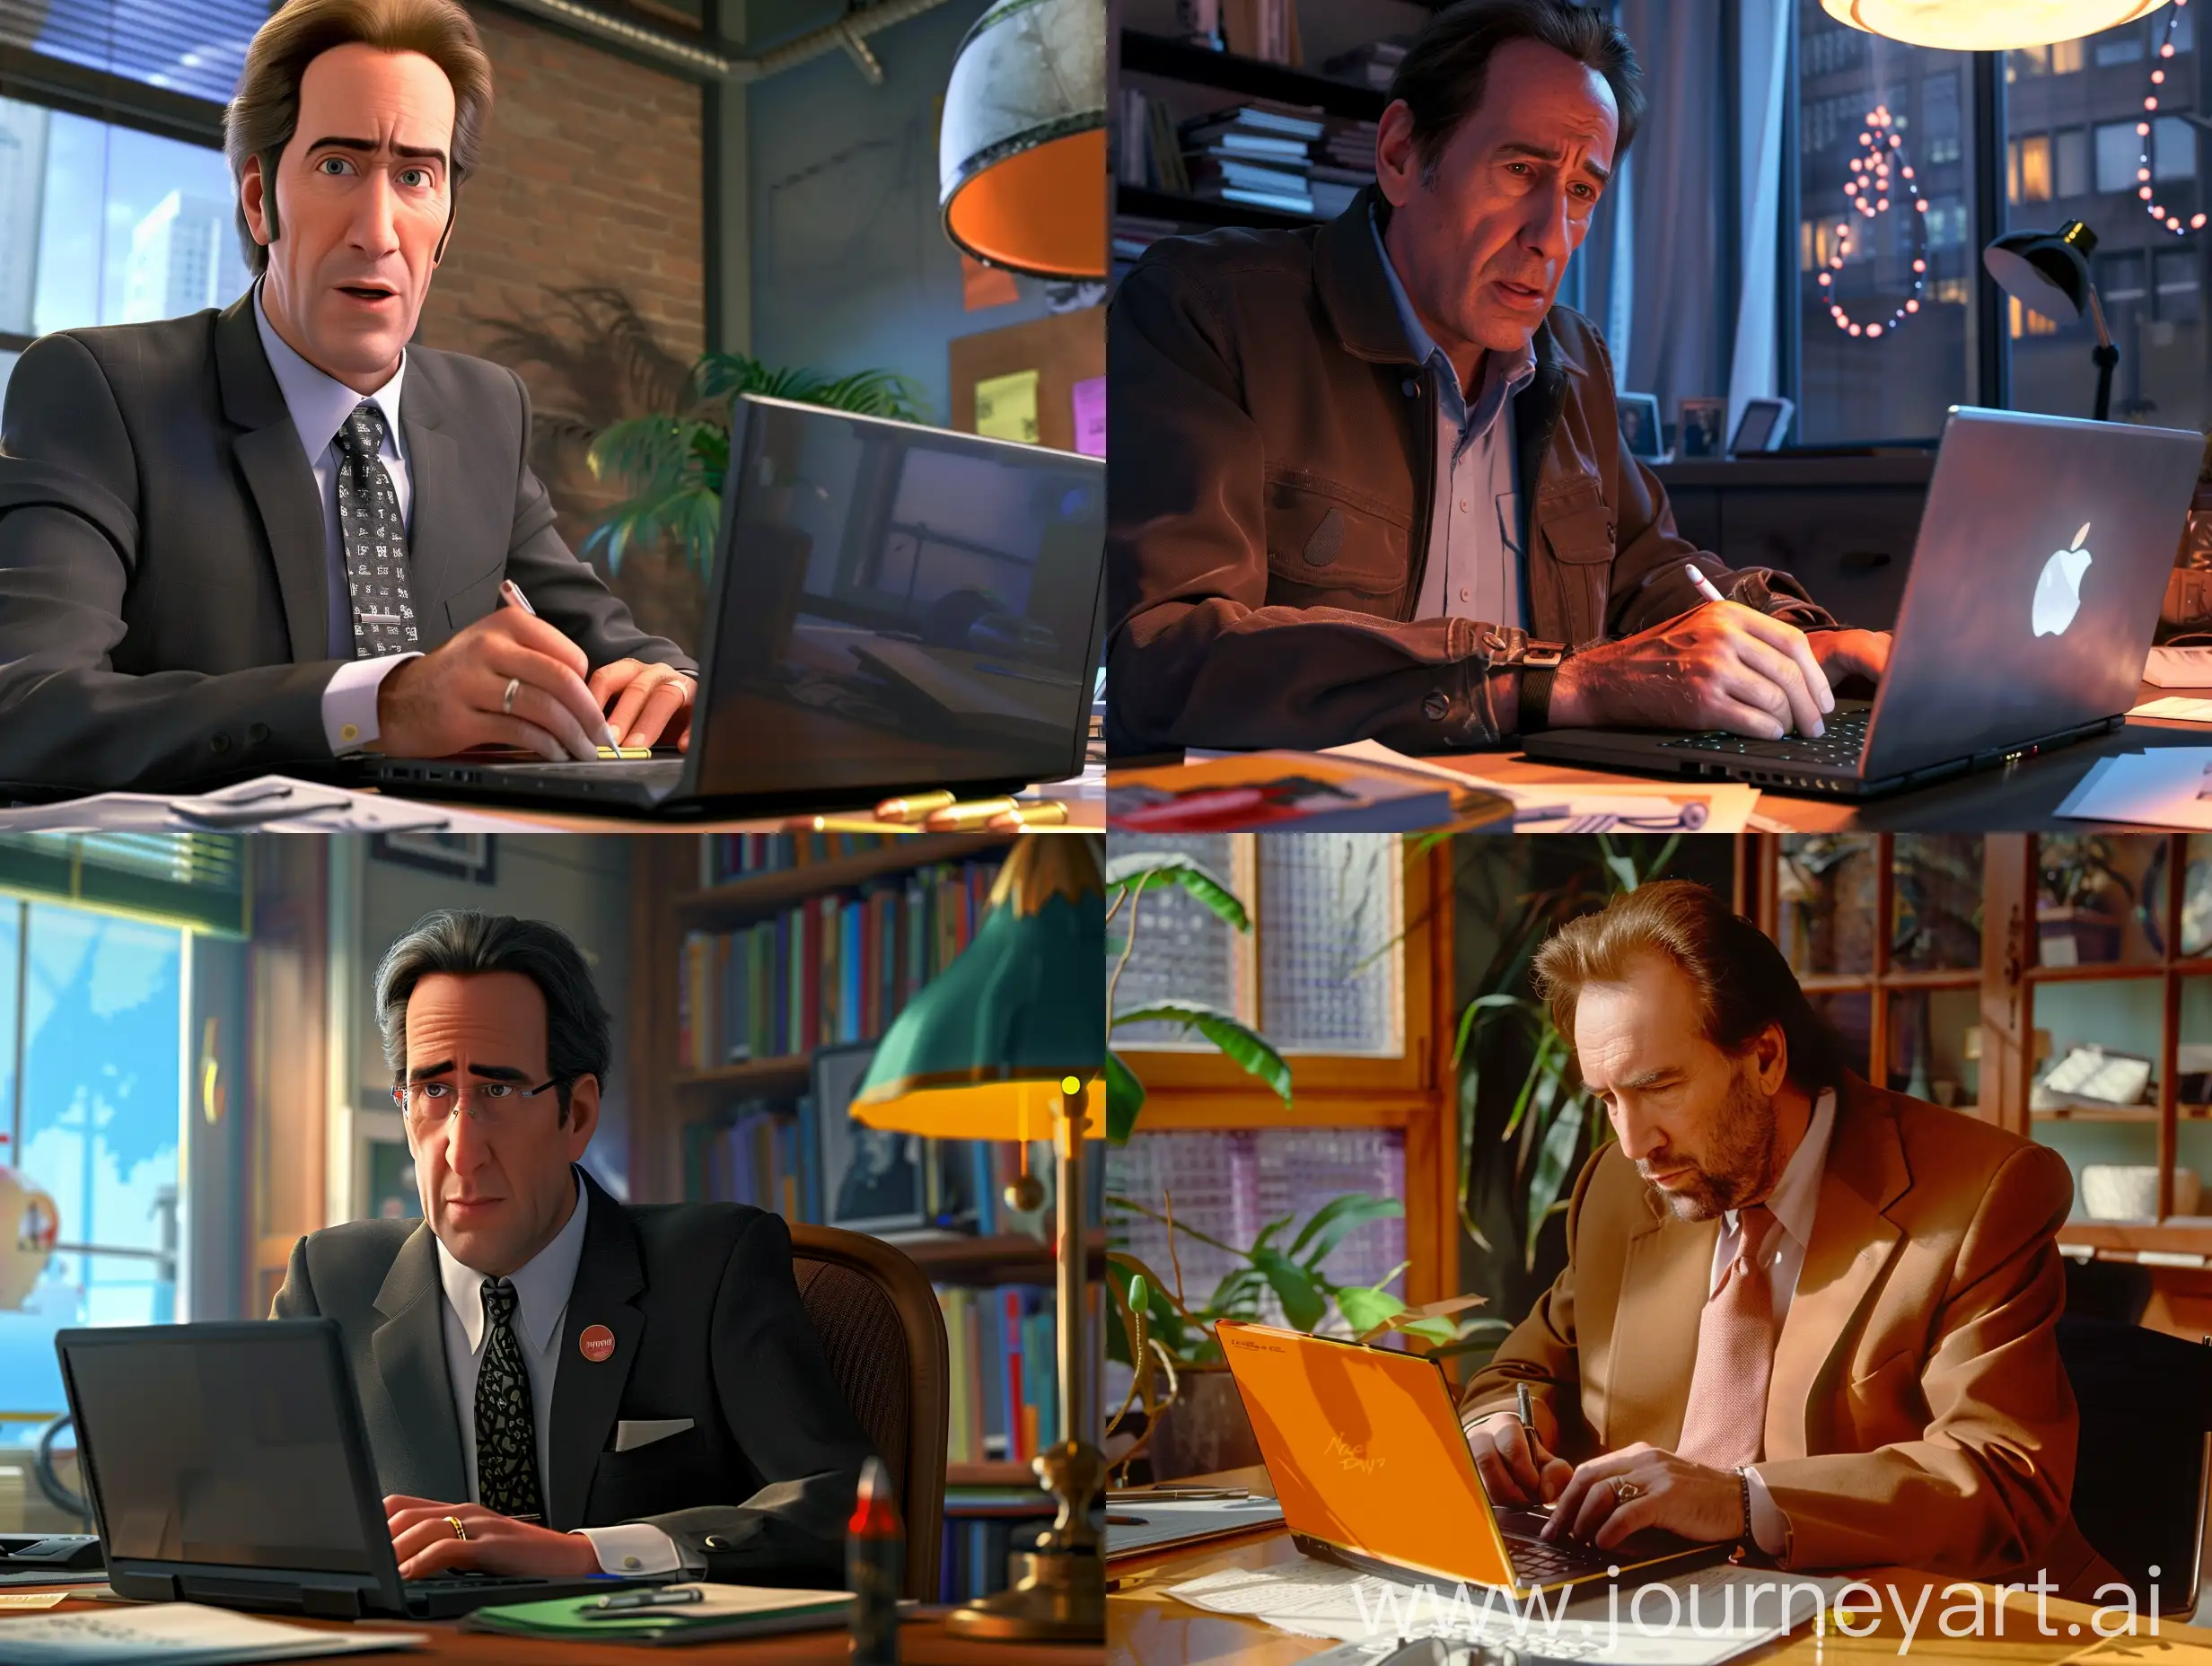 Nicolas Cage from the movie The Gun Baron sits diligently writing messages on a Pixar-style laptop in the office